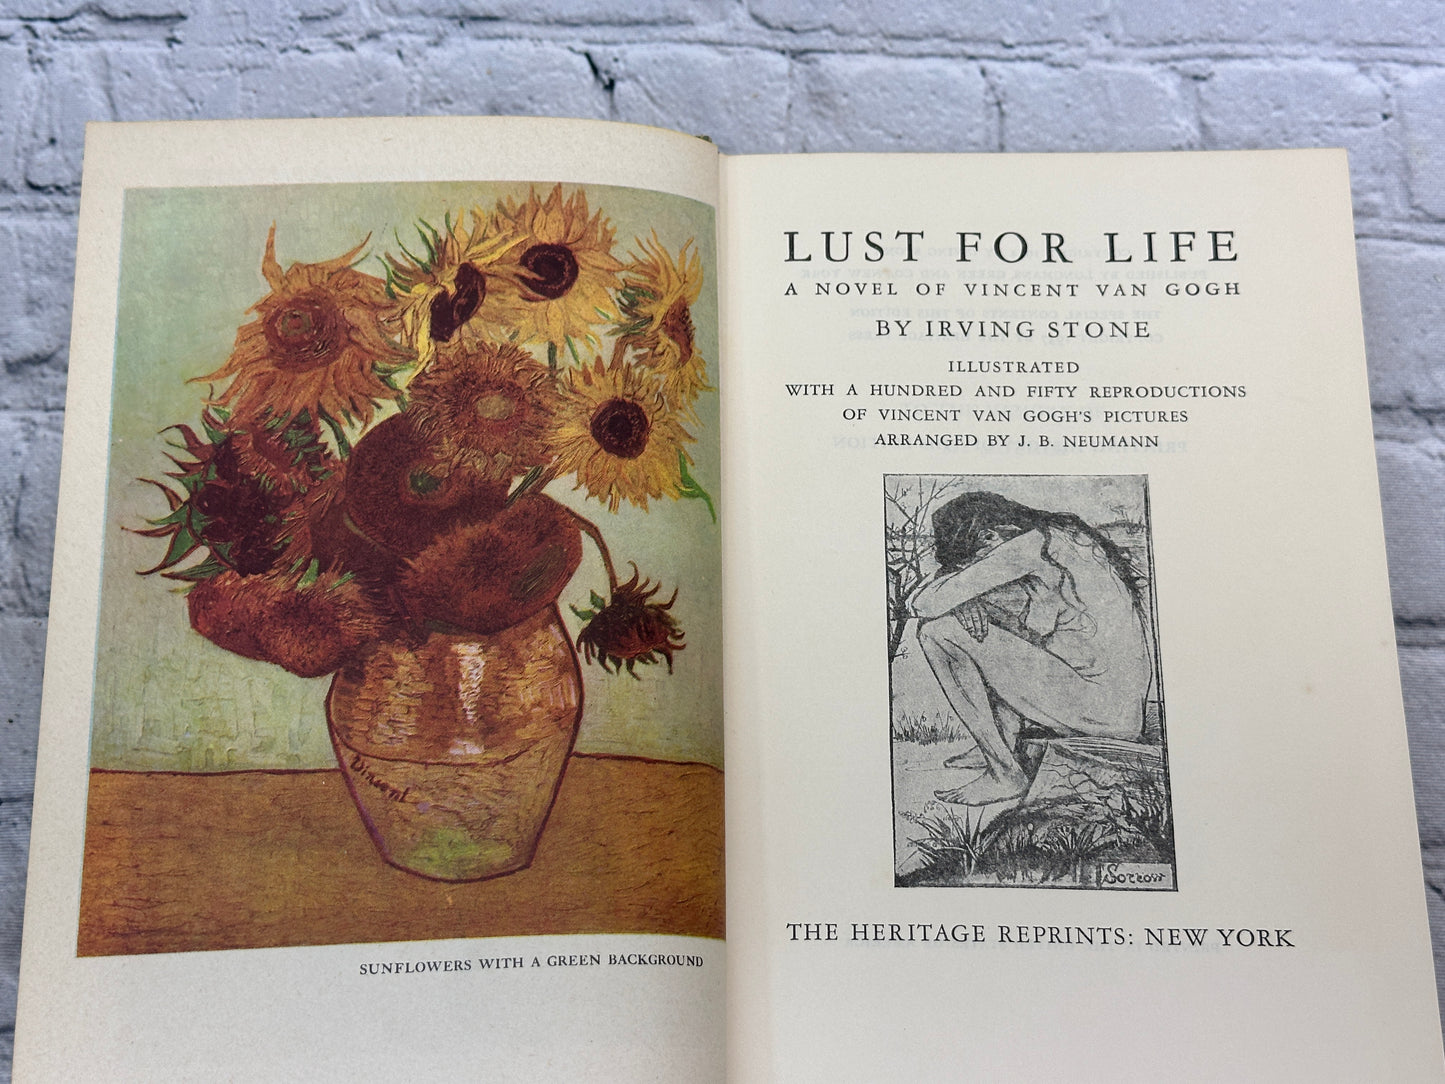 Lust for Life: A Novel About Van Gogh By Irving Stone [1953]